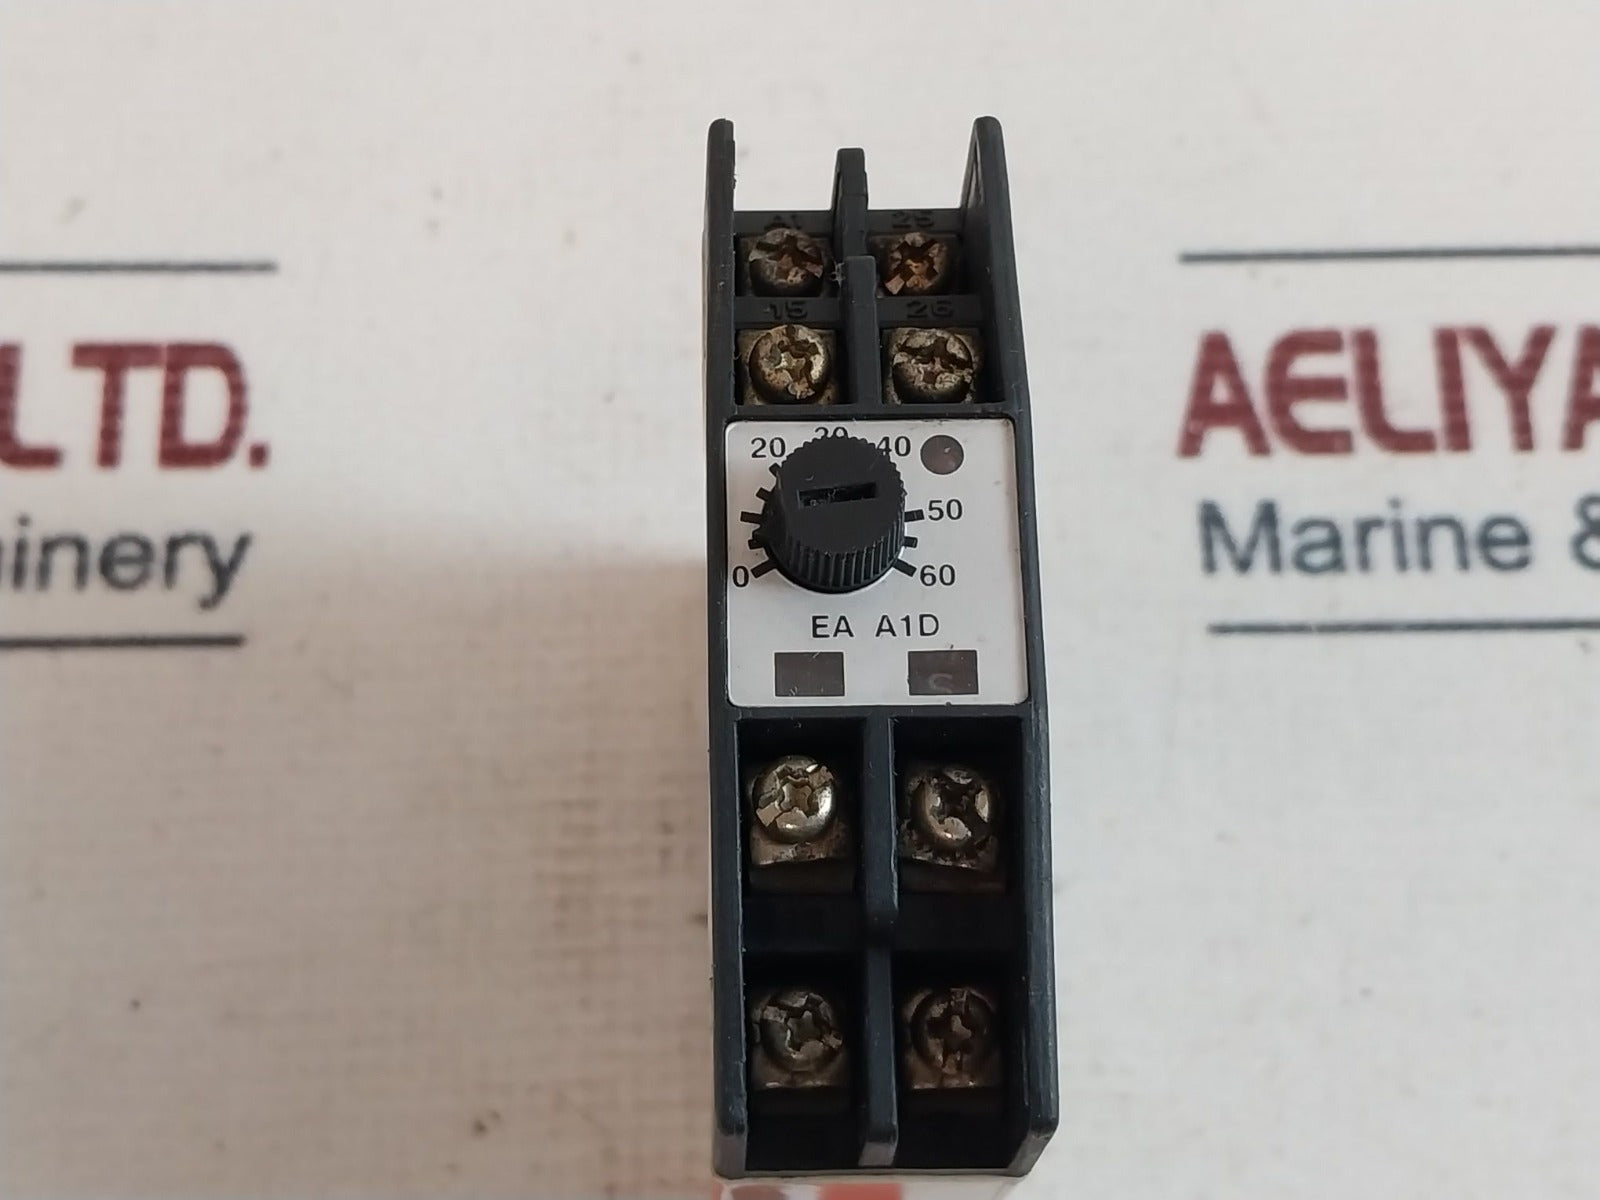 Eapl A1D1-x (60M) Delay On Timer